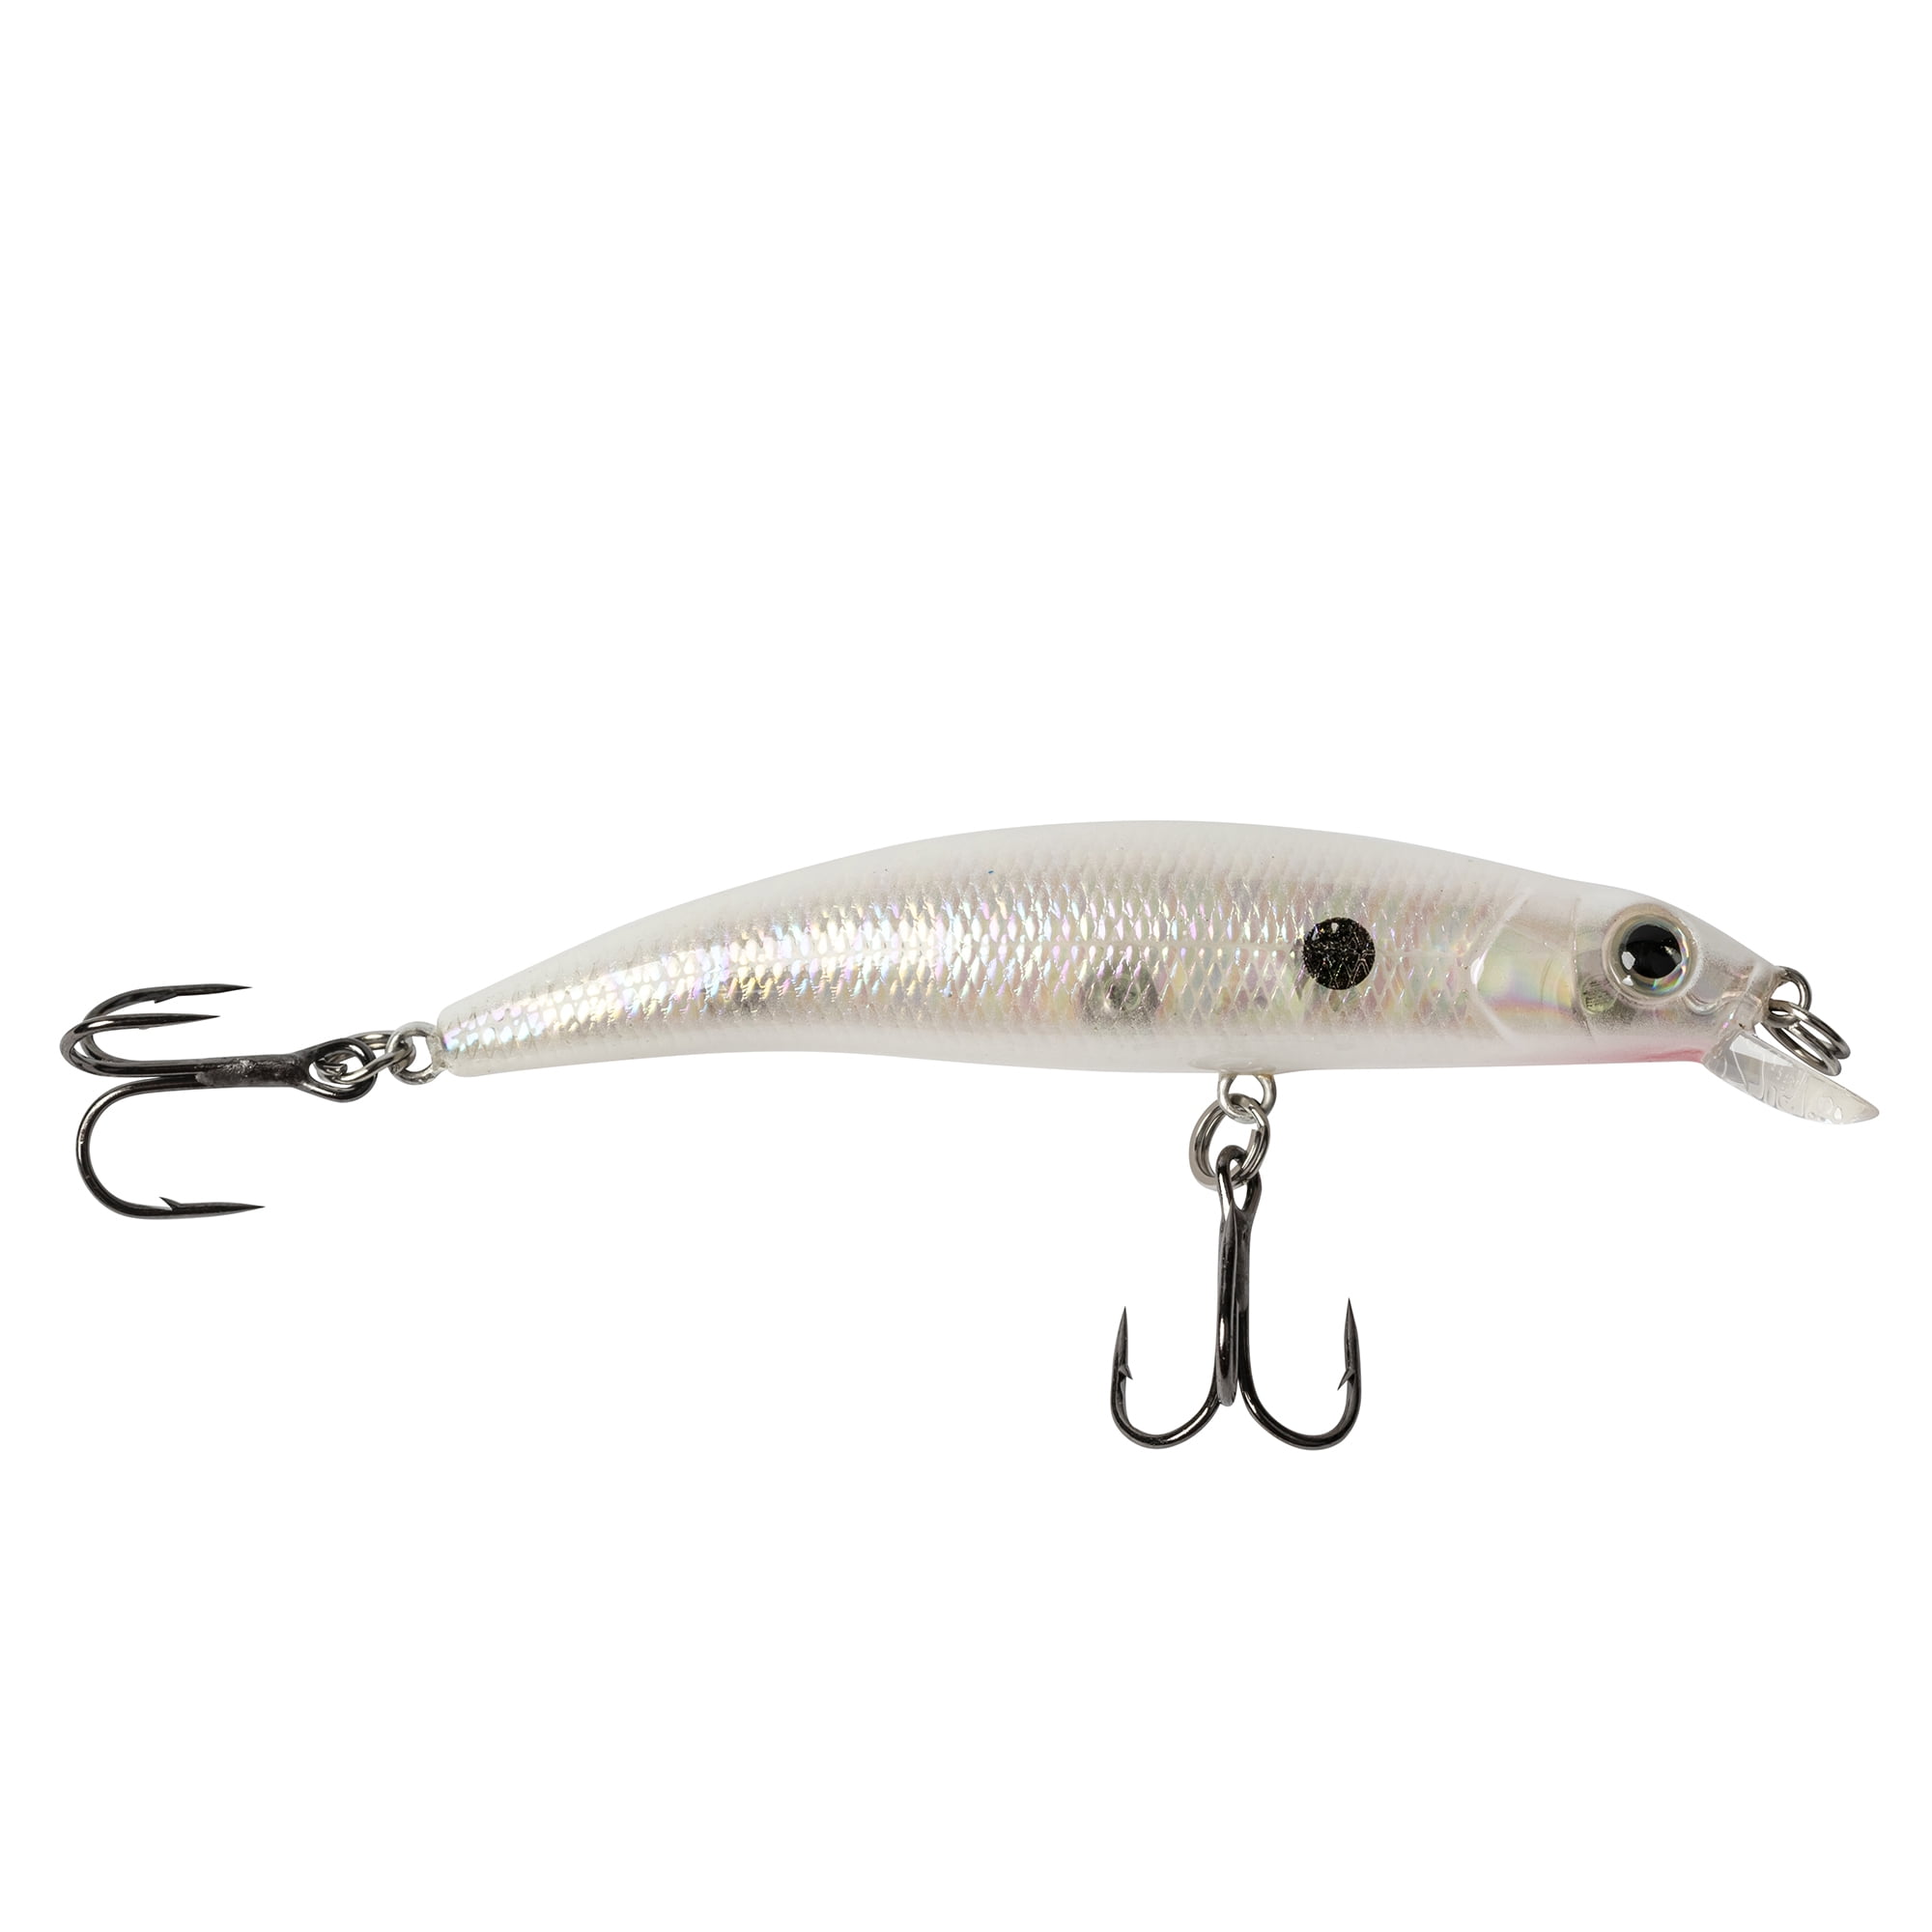 Ozark Trail 3/8 Ounce Trout Minnow Fishing Lure 